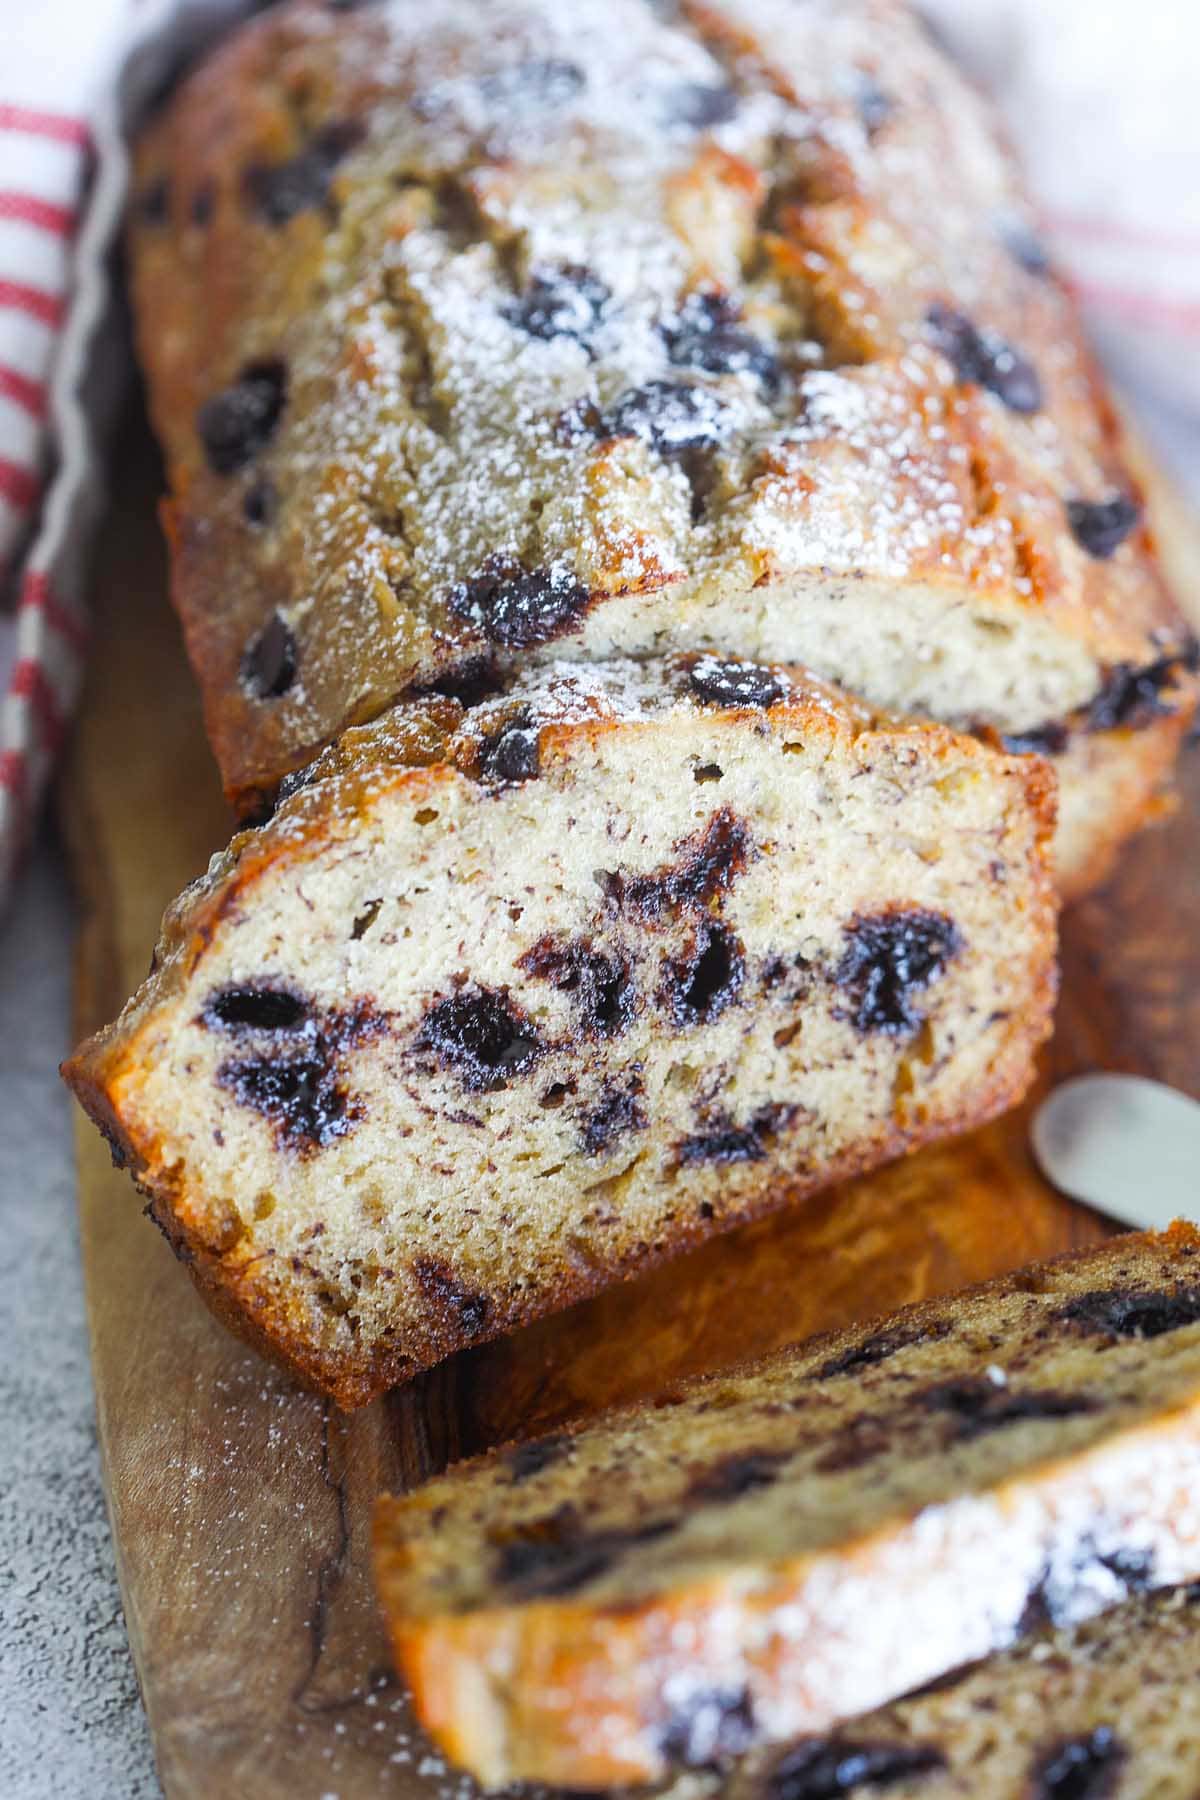 Banana bread recipe with chocolate chips.